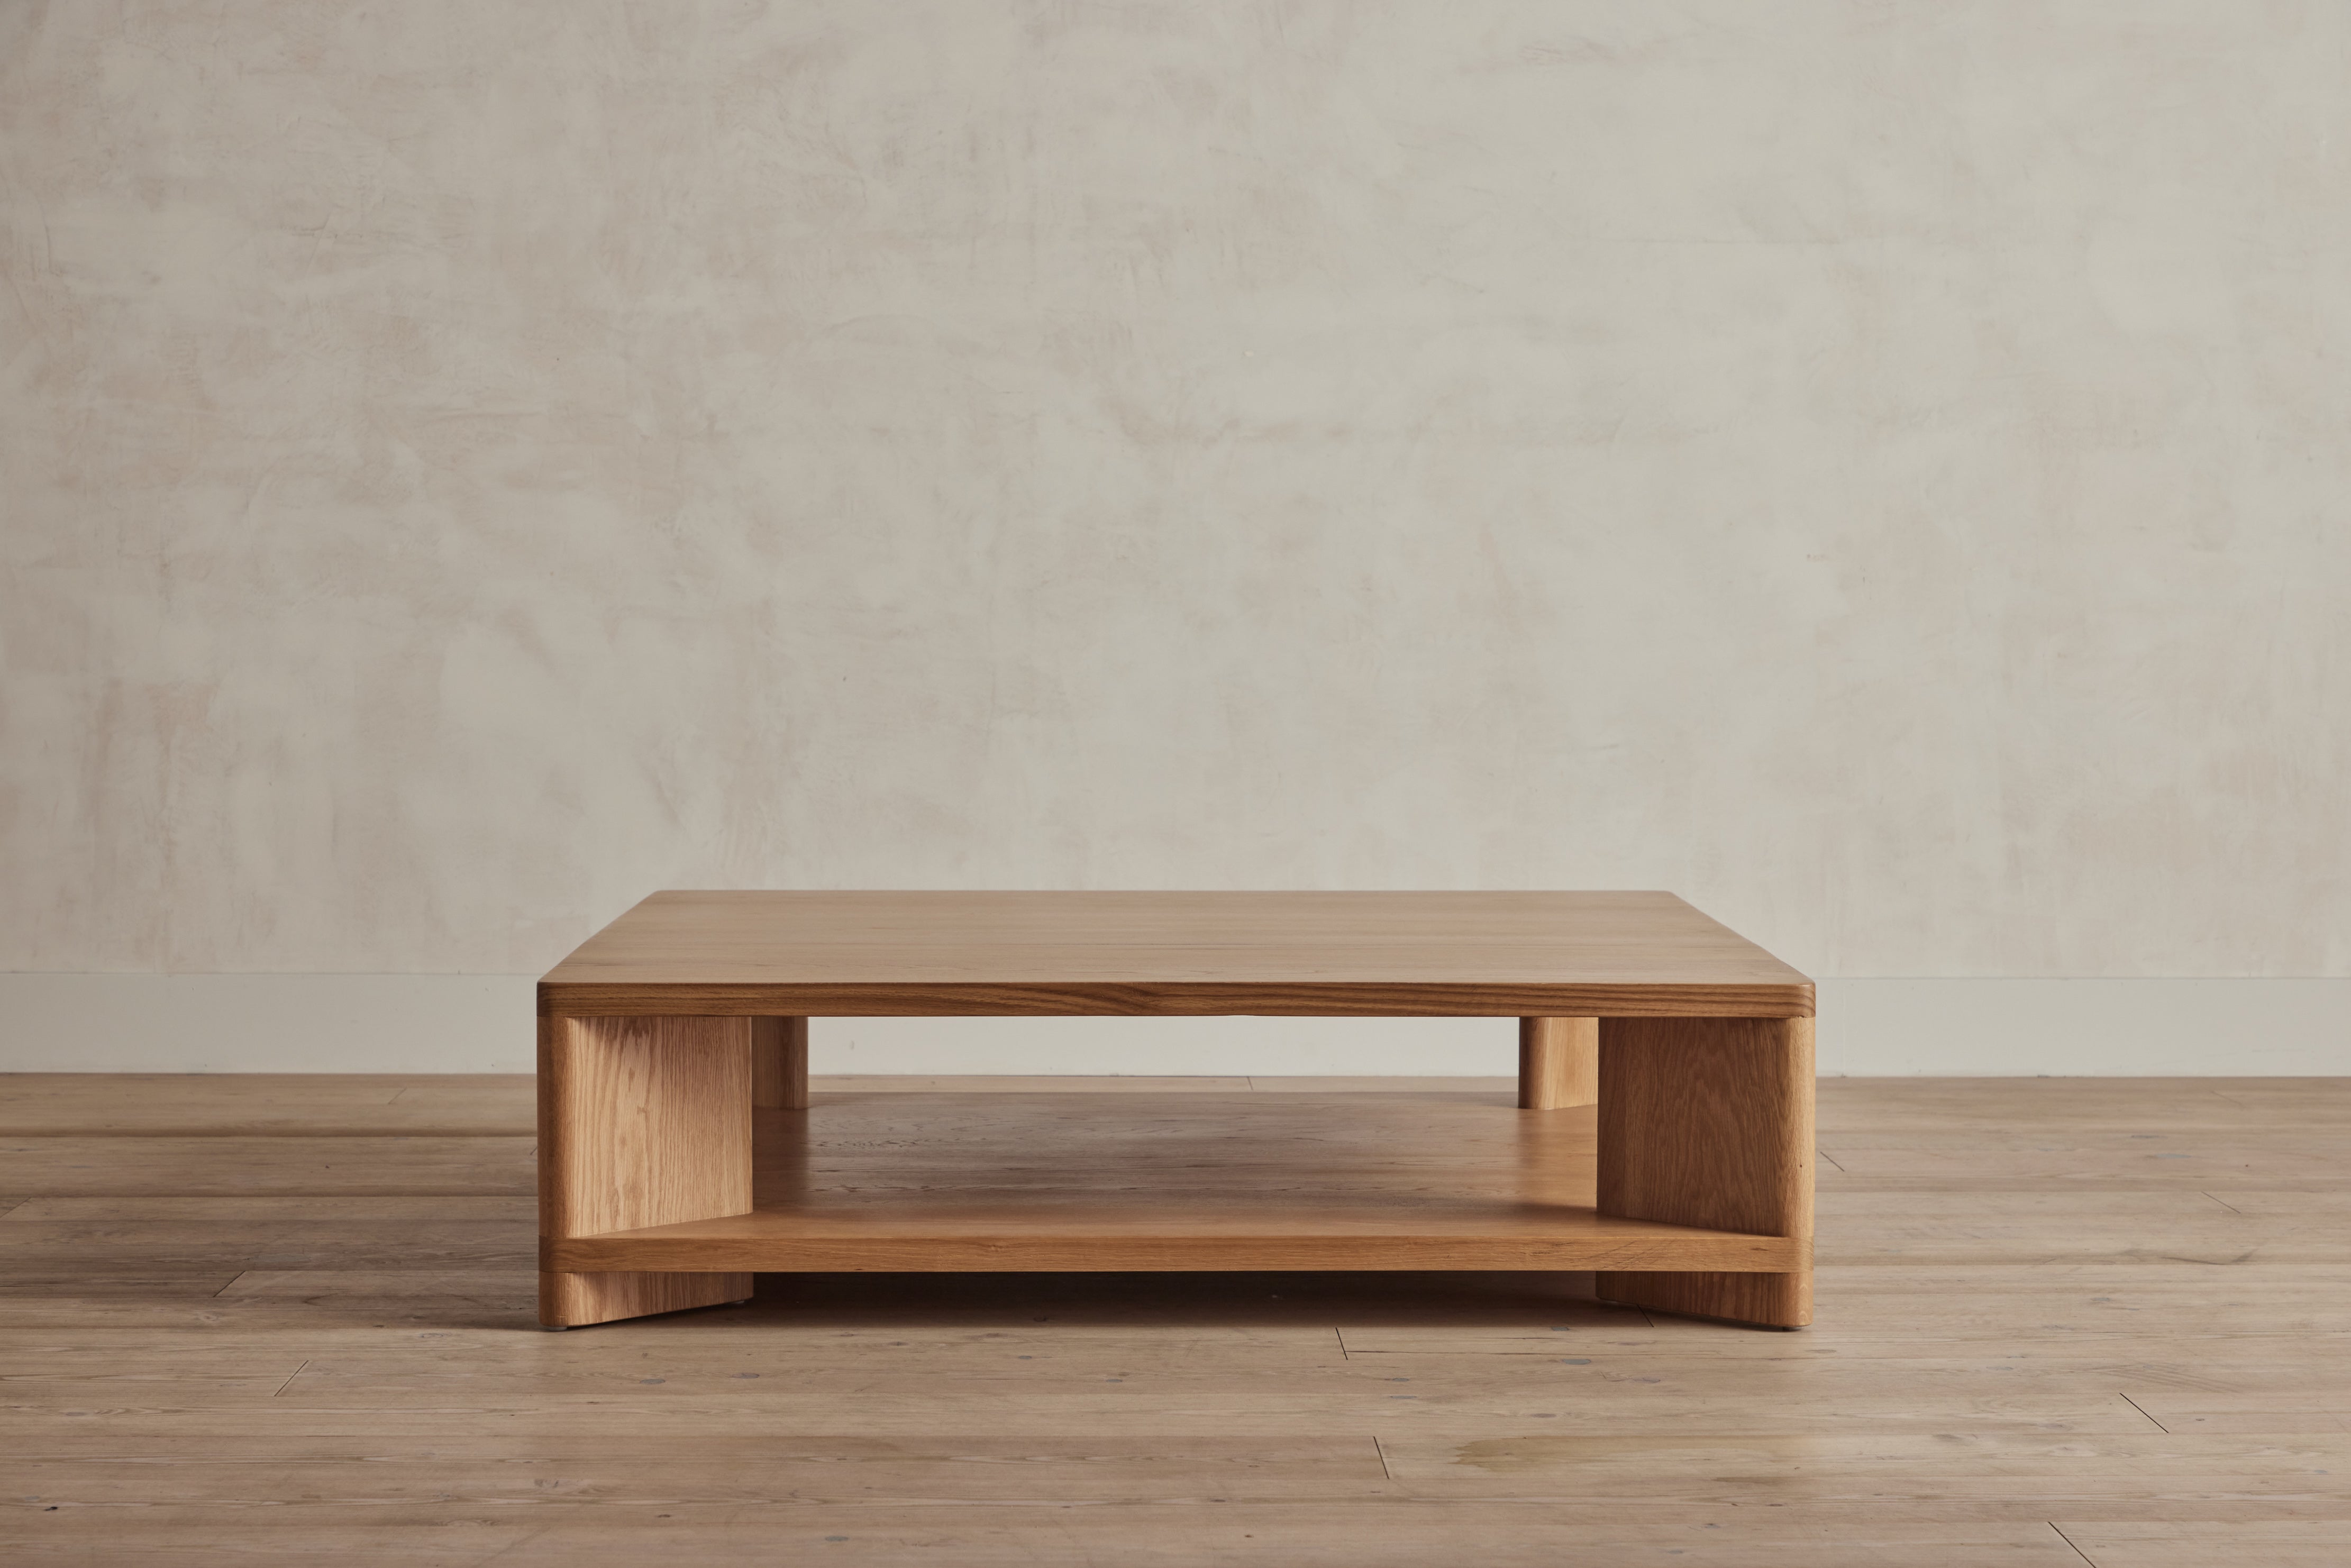 Nickey Kehoe 48" Square Shelf Coffee Table - In Stock